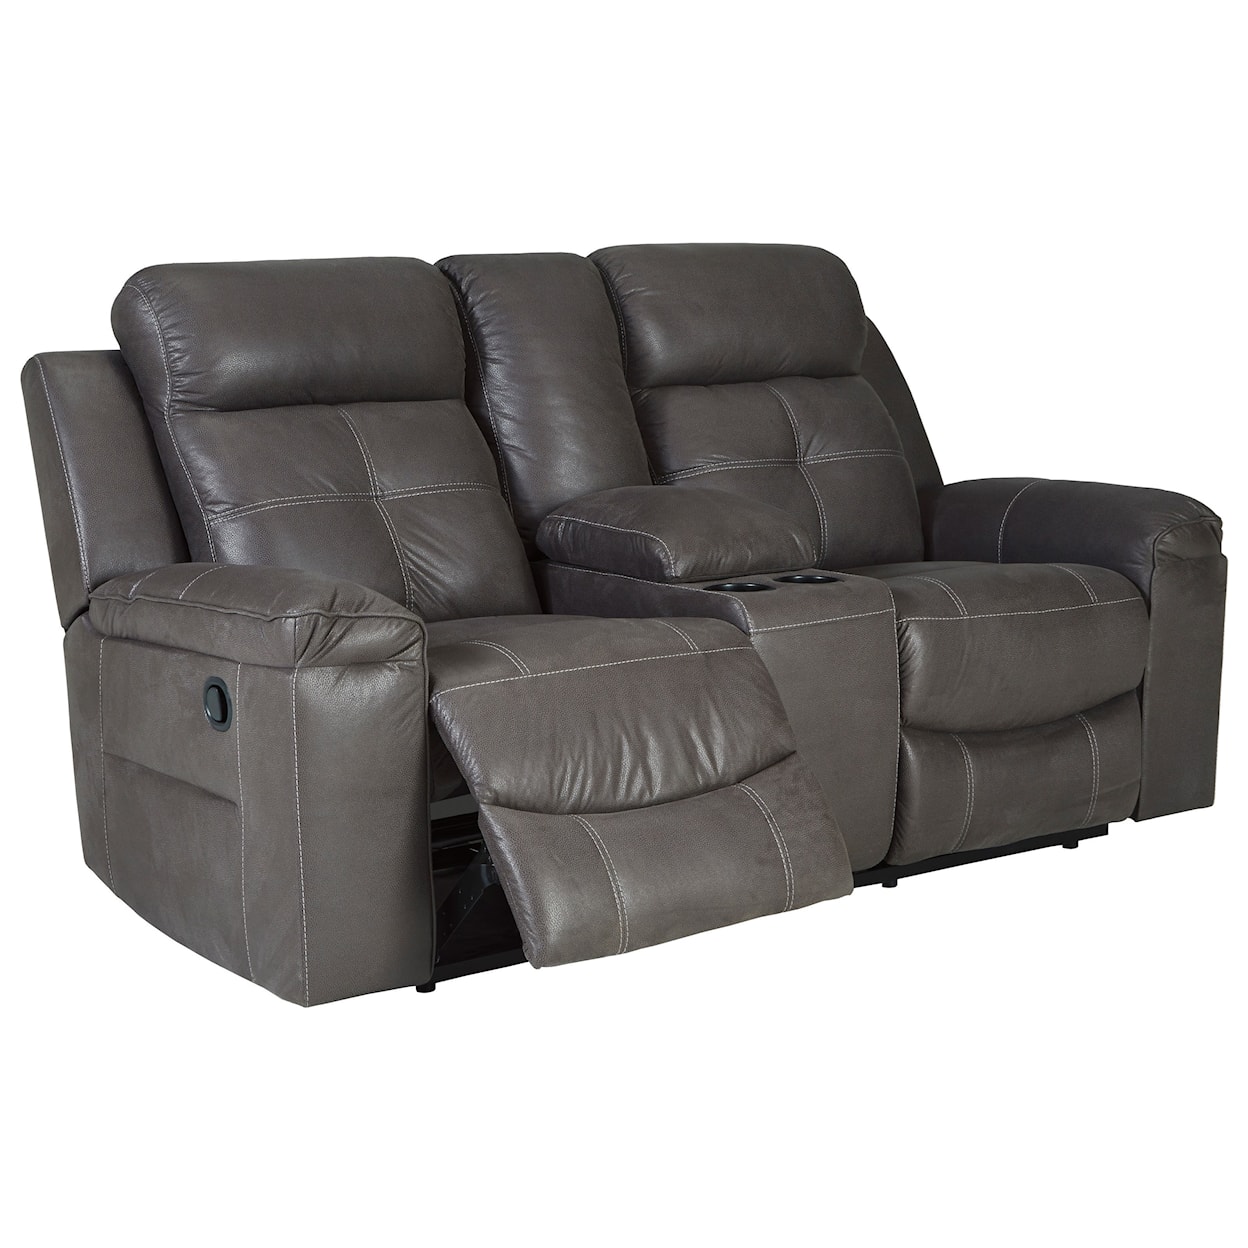 Michael Alan Select Jesolo Double Reclining Loveseat with Console